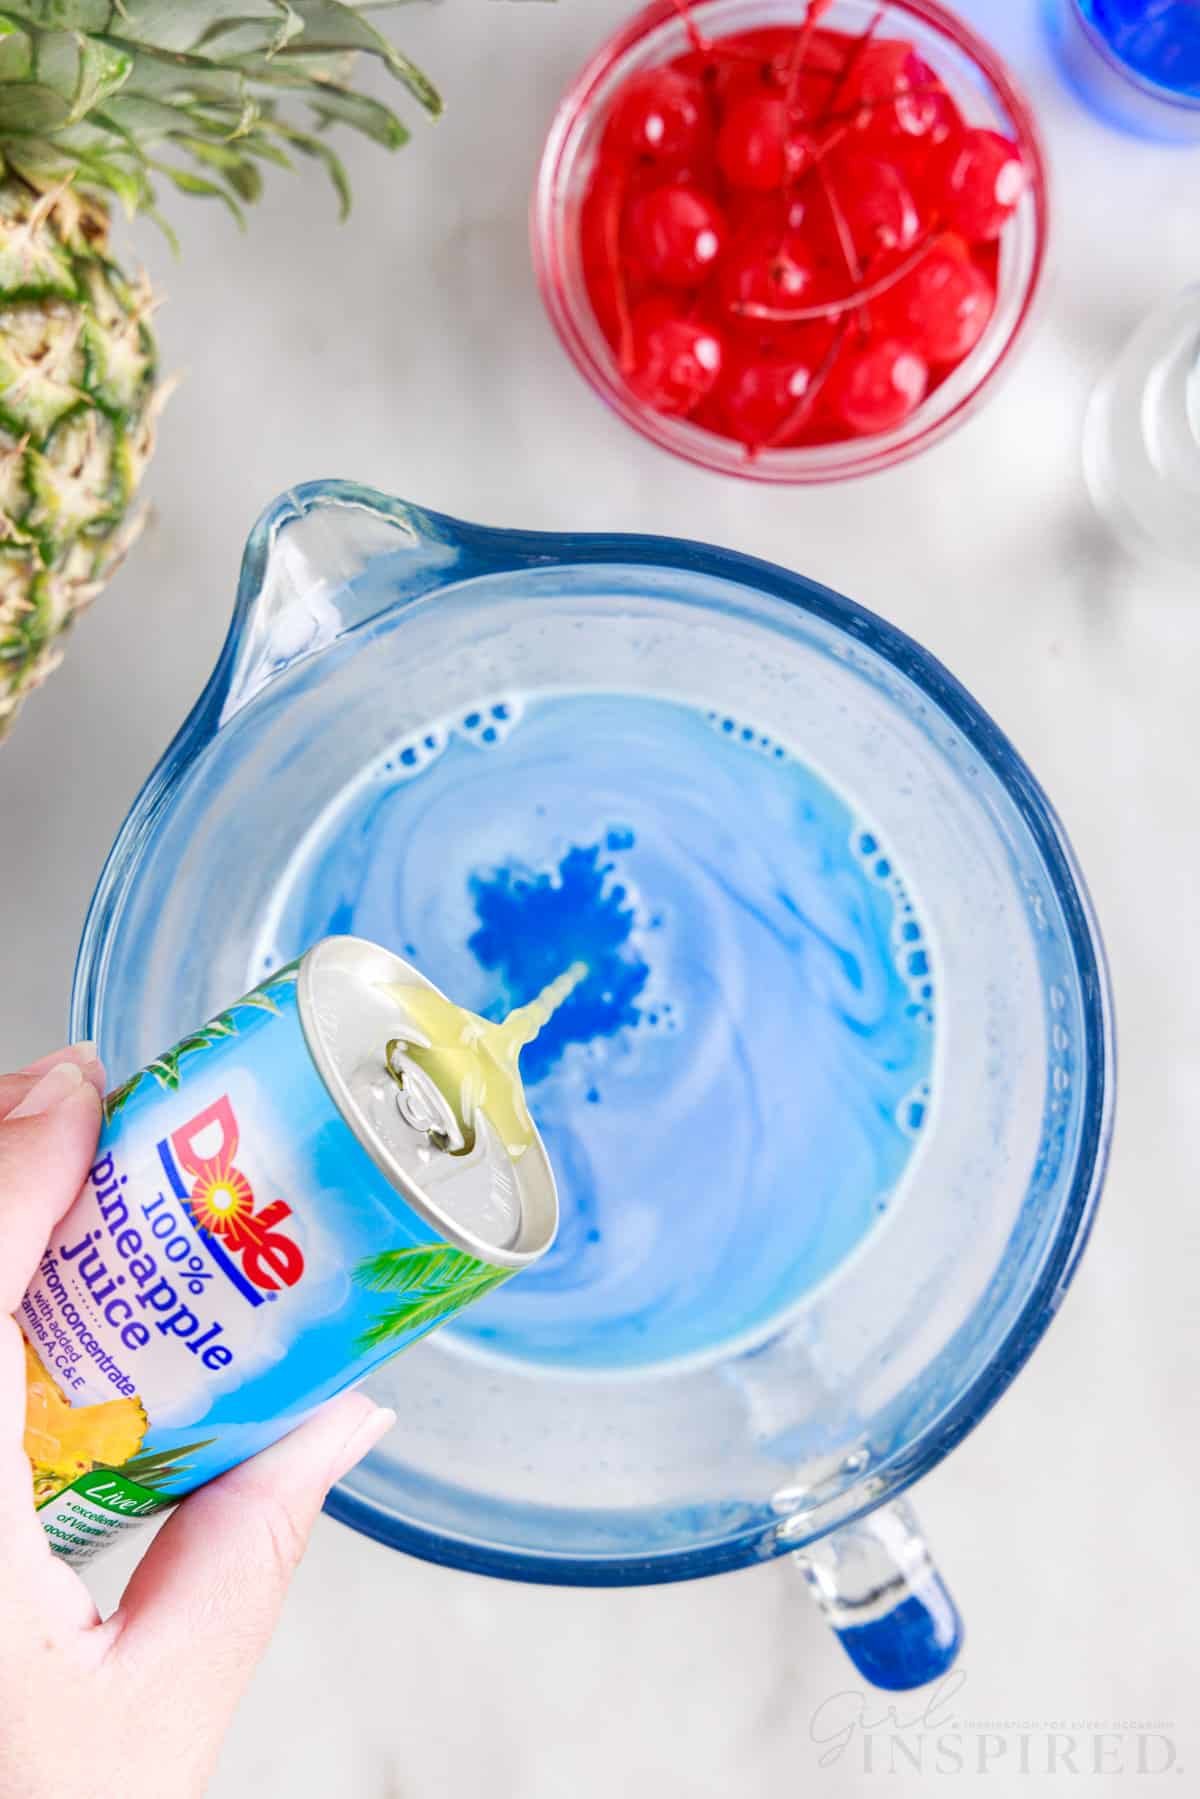 Pineapple juice added to blue jello mixture in a mixing bowl next to a pineapple and small dish of cherries.